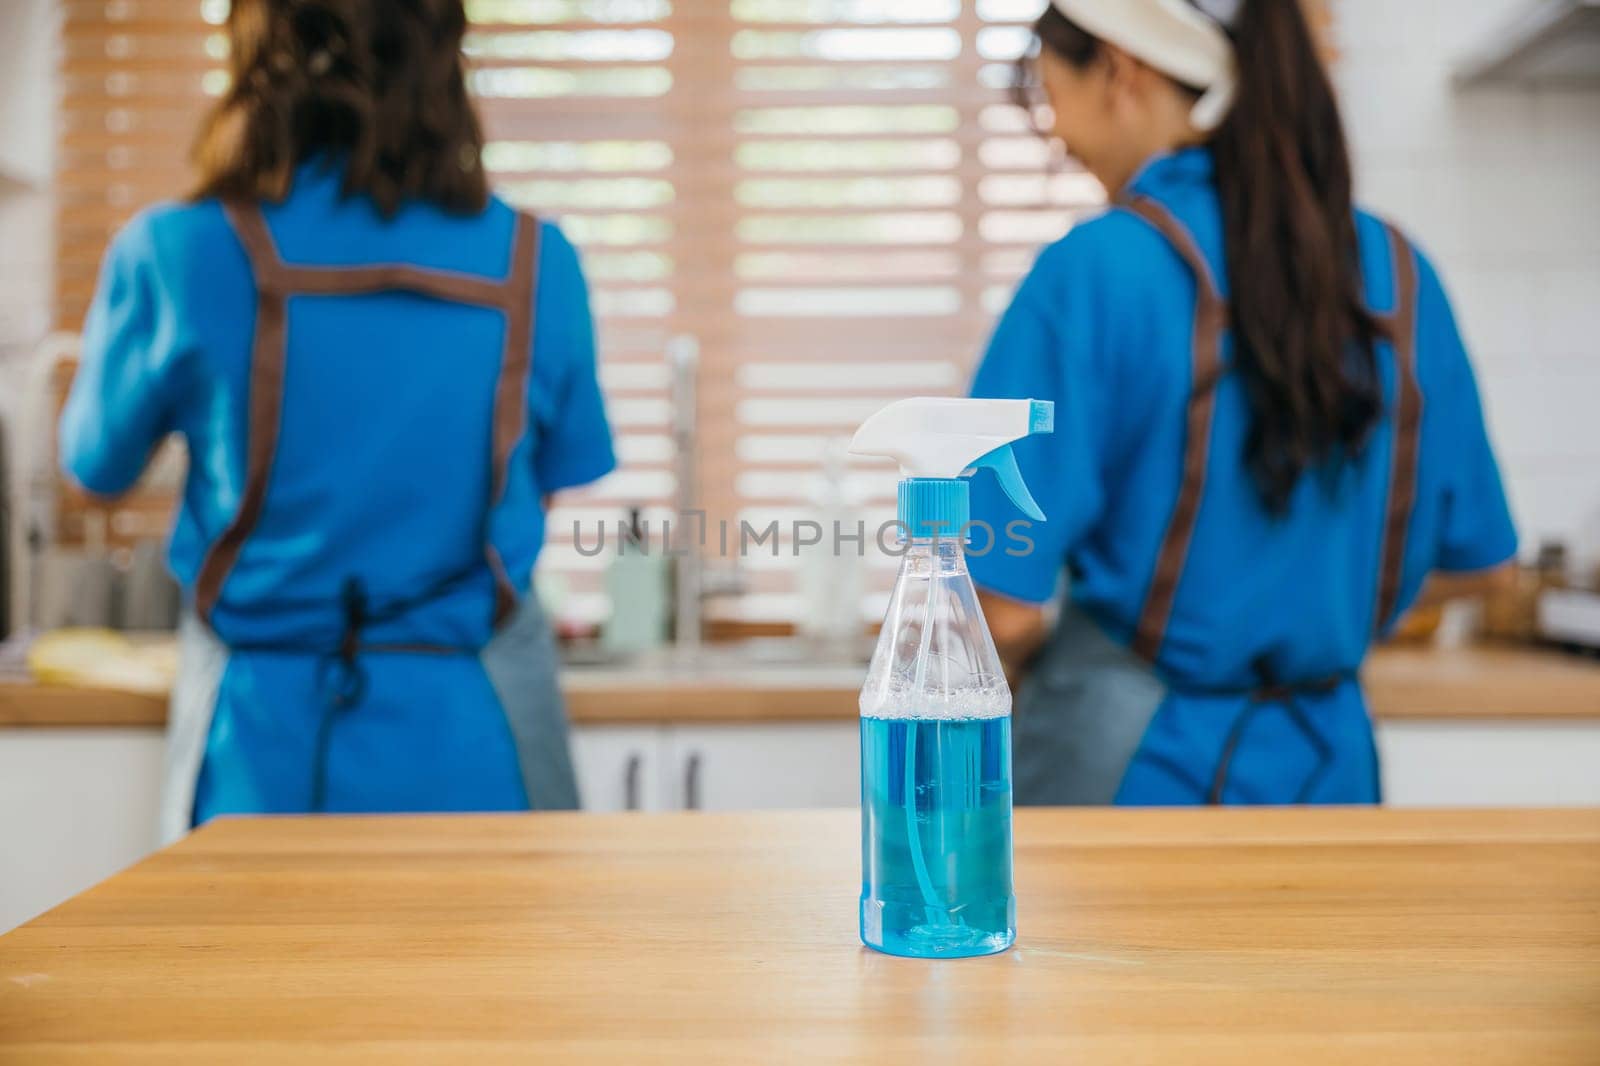 Occupied woman cleaning kitchen desk using spray product and towel. Housekeeping concept with a focus on hygiene and safety. Uniformed cleaner at work. Clean disinfect home care. Closeup spray bottle. by Sorapop